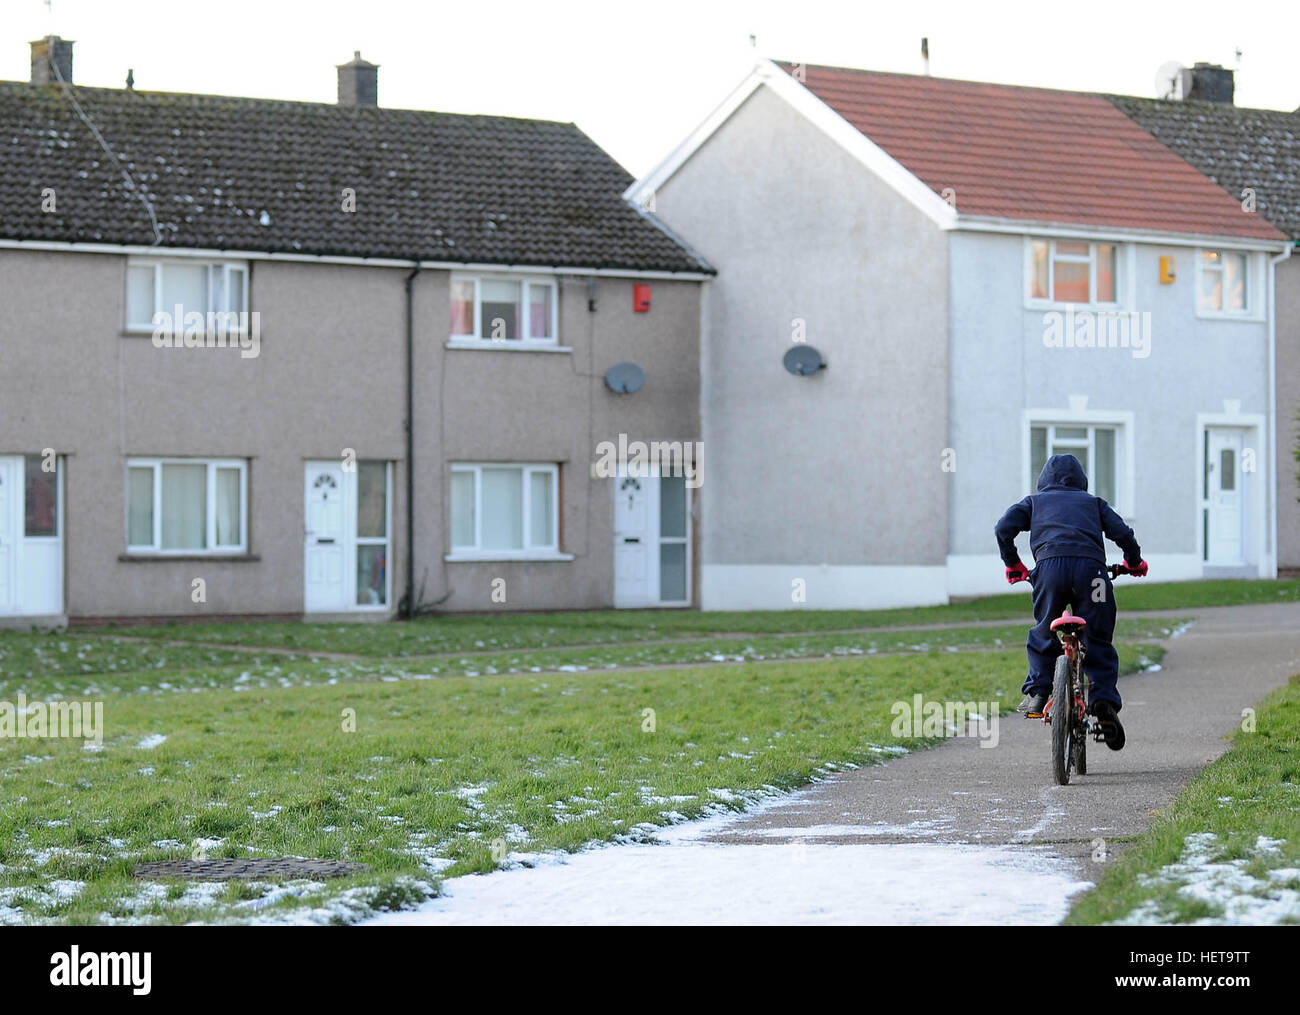 A boy cycles on a snow covered path on the Gurnos Council housing estate in Merthyr Tydfil, South Wales, UK. Stock Photo